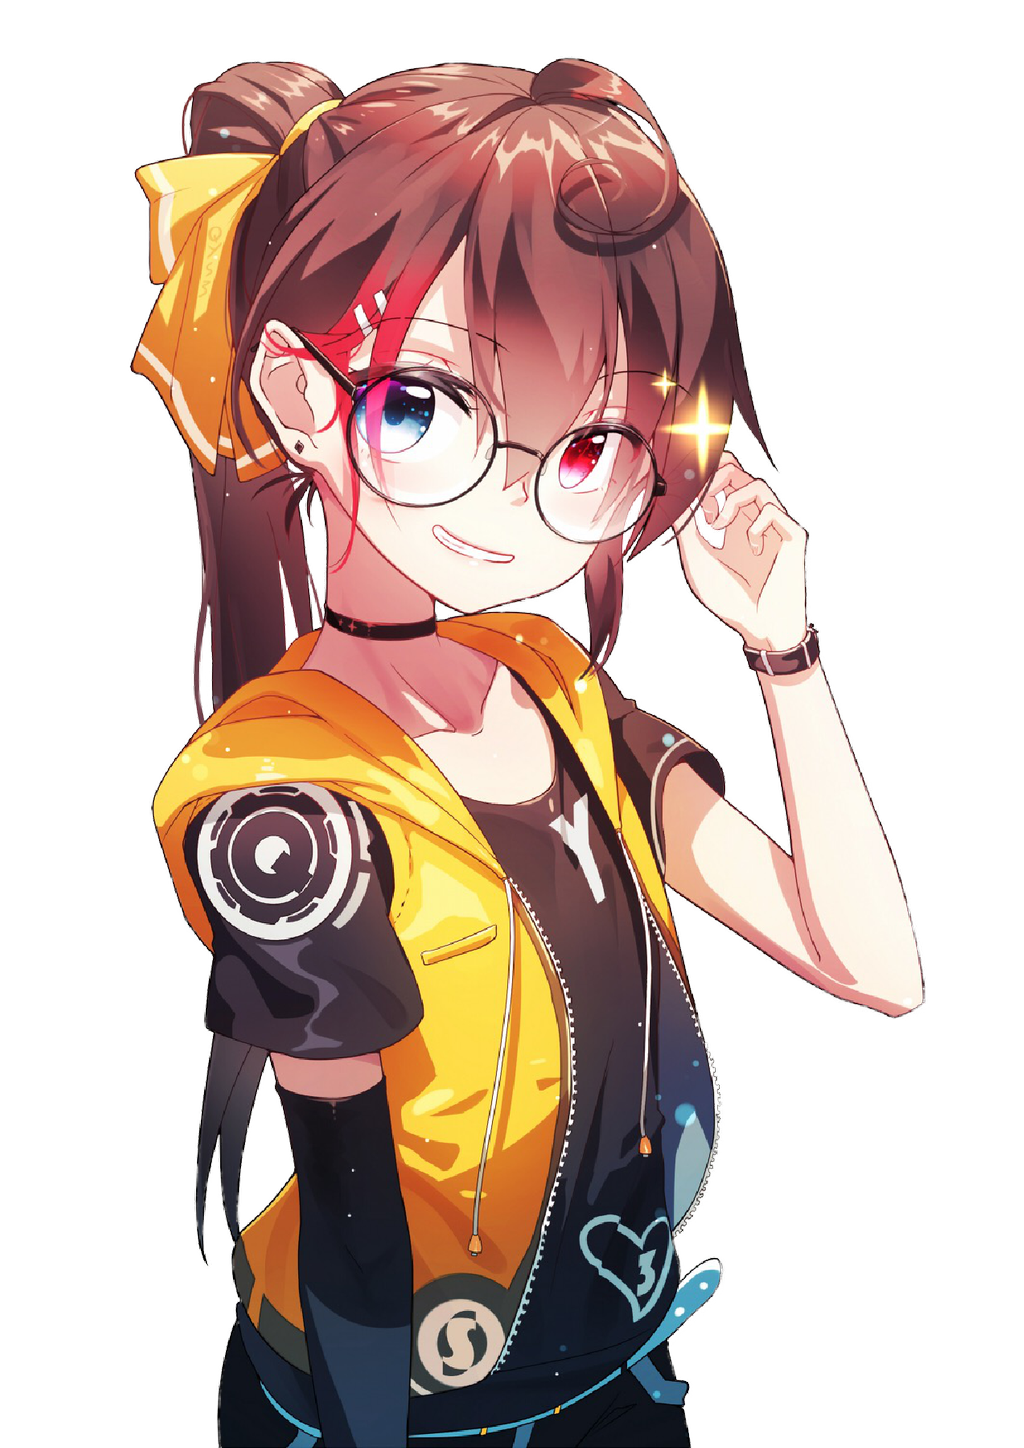 https://www.pngall.com/wp-content/uploads/5/Cute-Anime-Girl-PNG-Image-HD.png